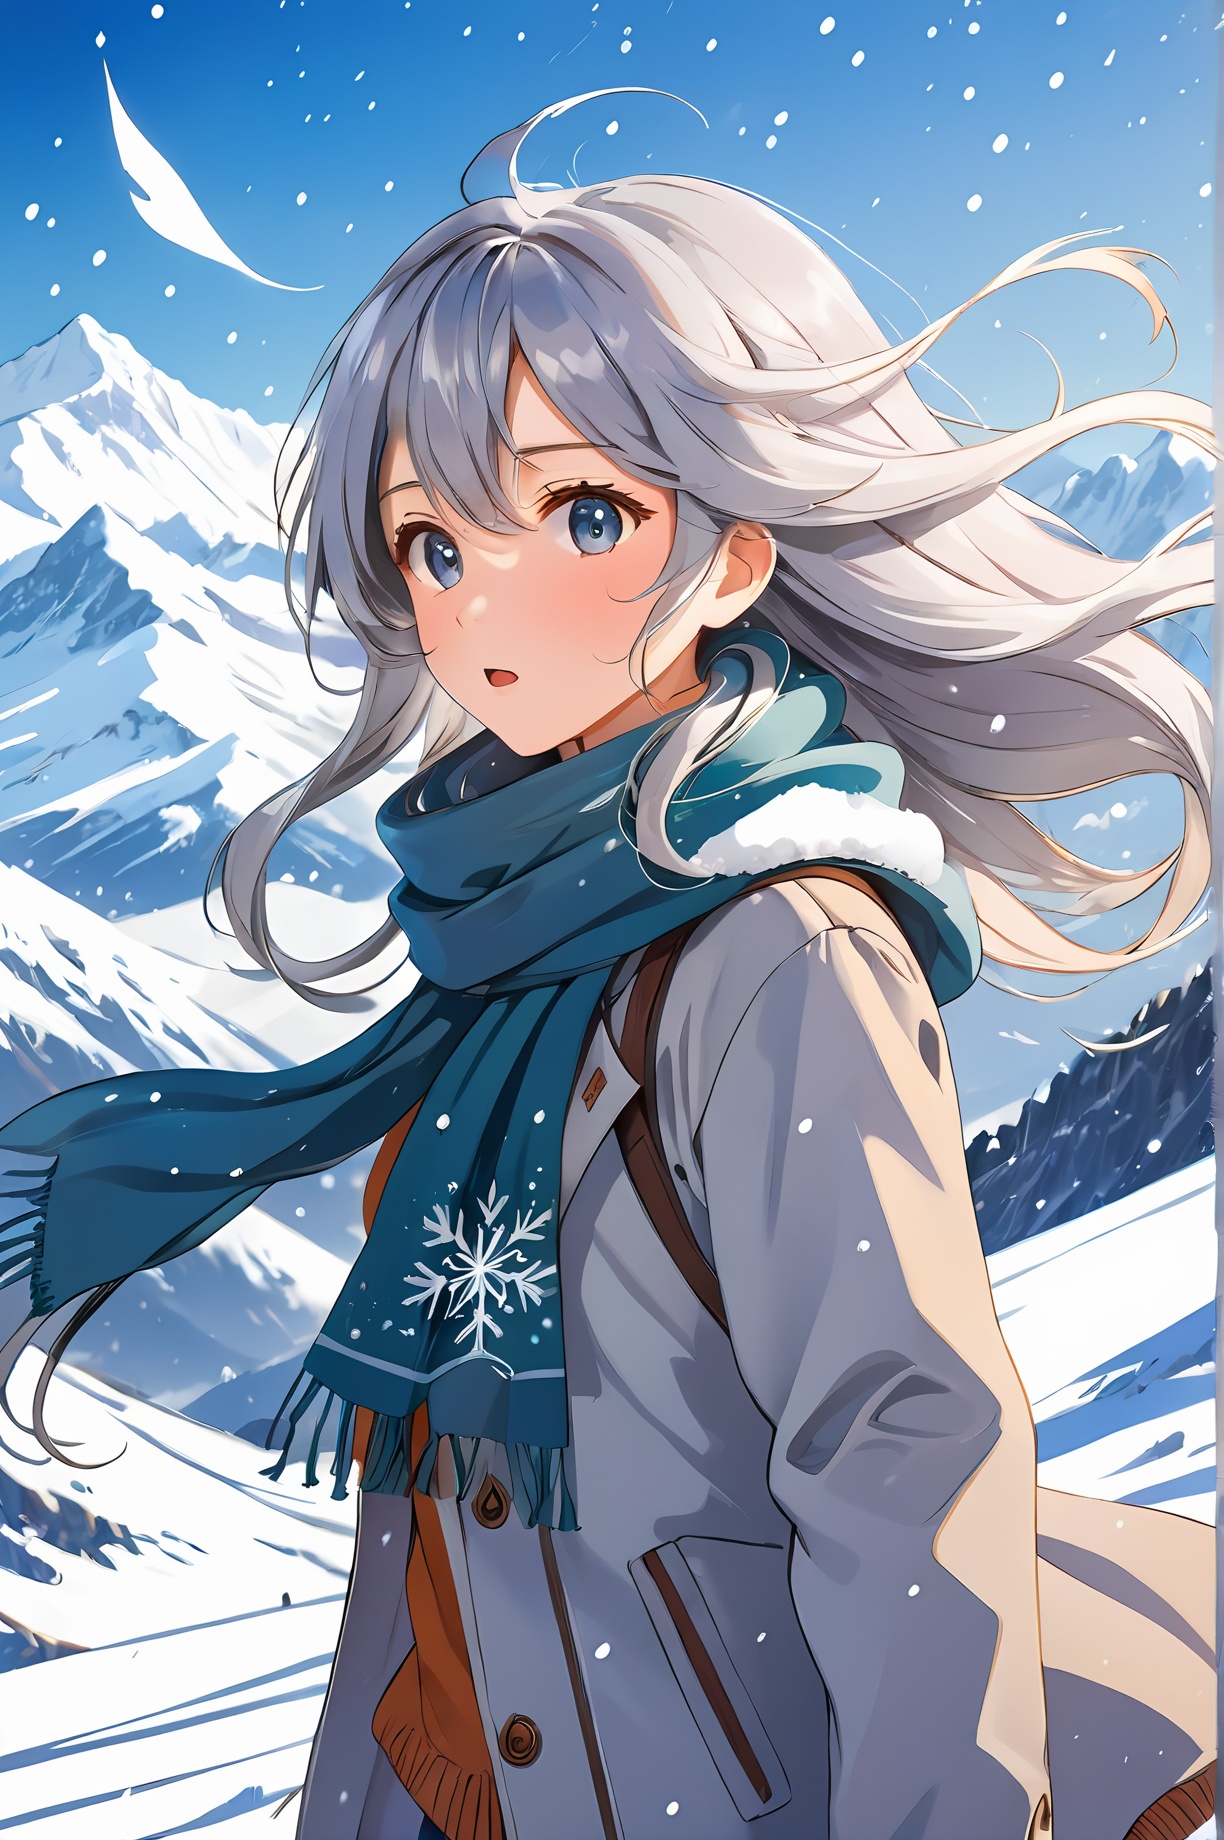 anime style of a girl, scarf, long silver flowing hair blowing in the wind, snow mountains in the far background, it's snowing